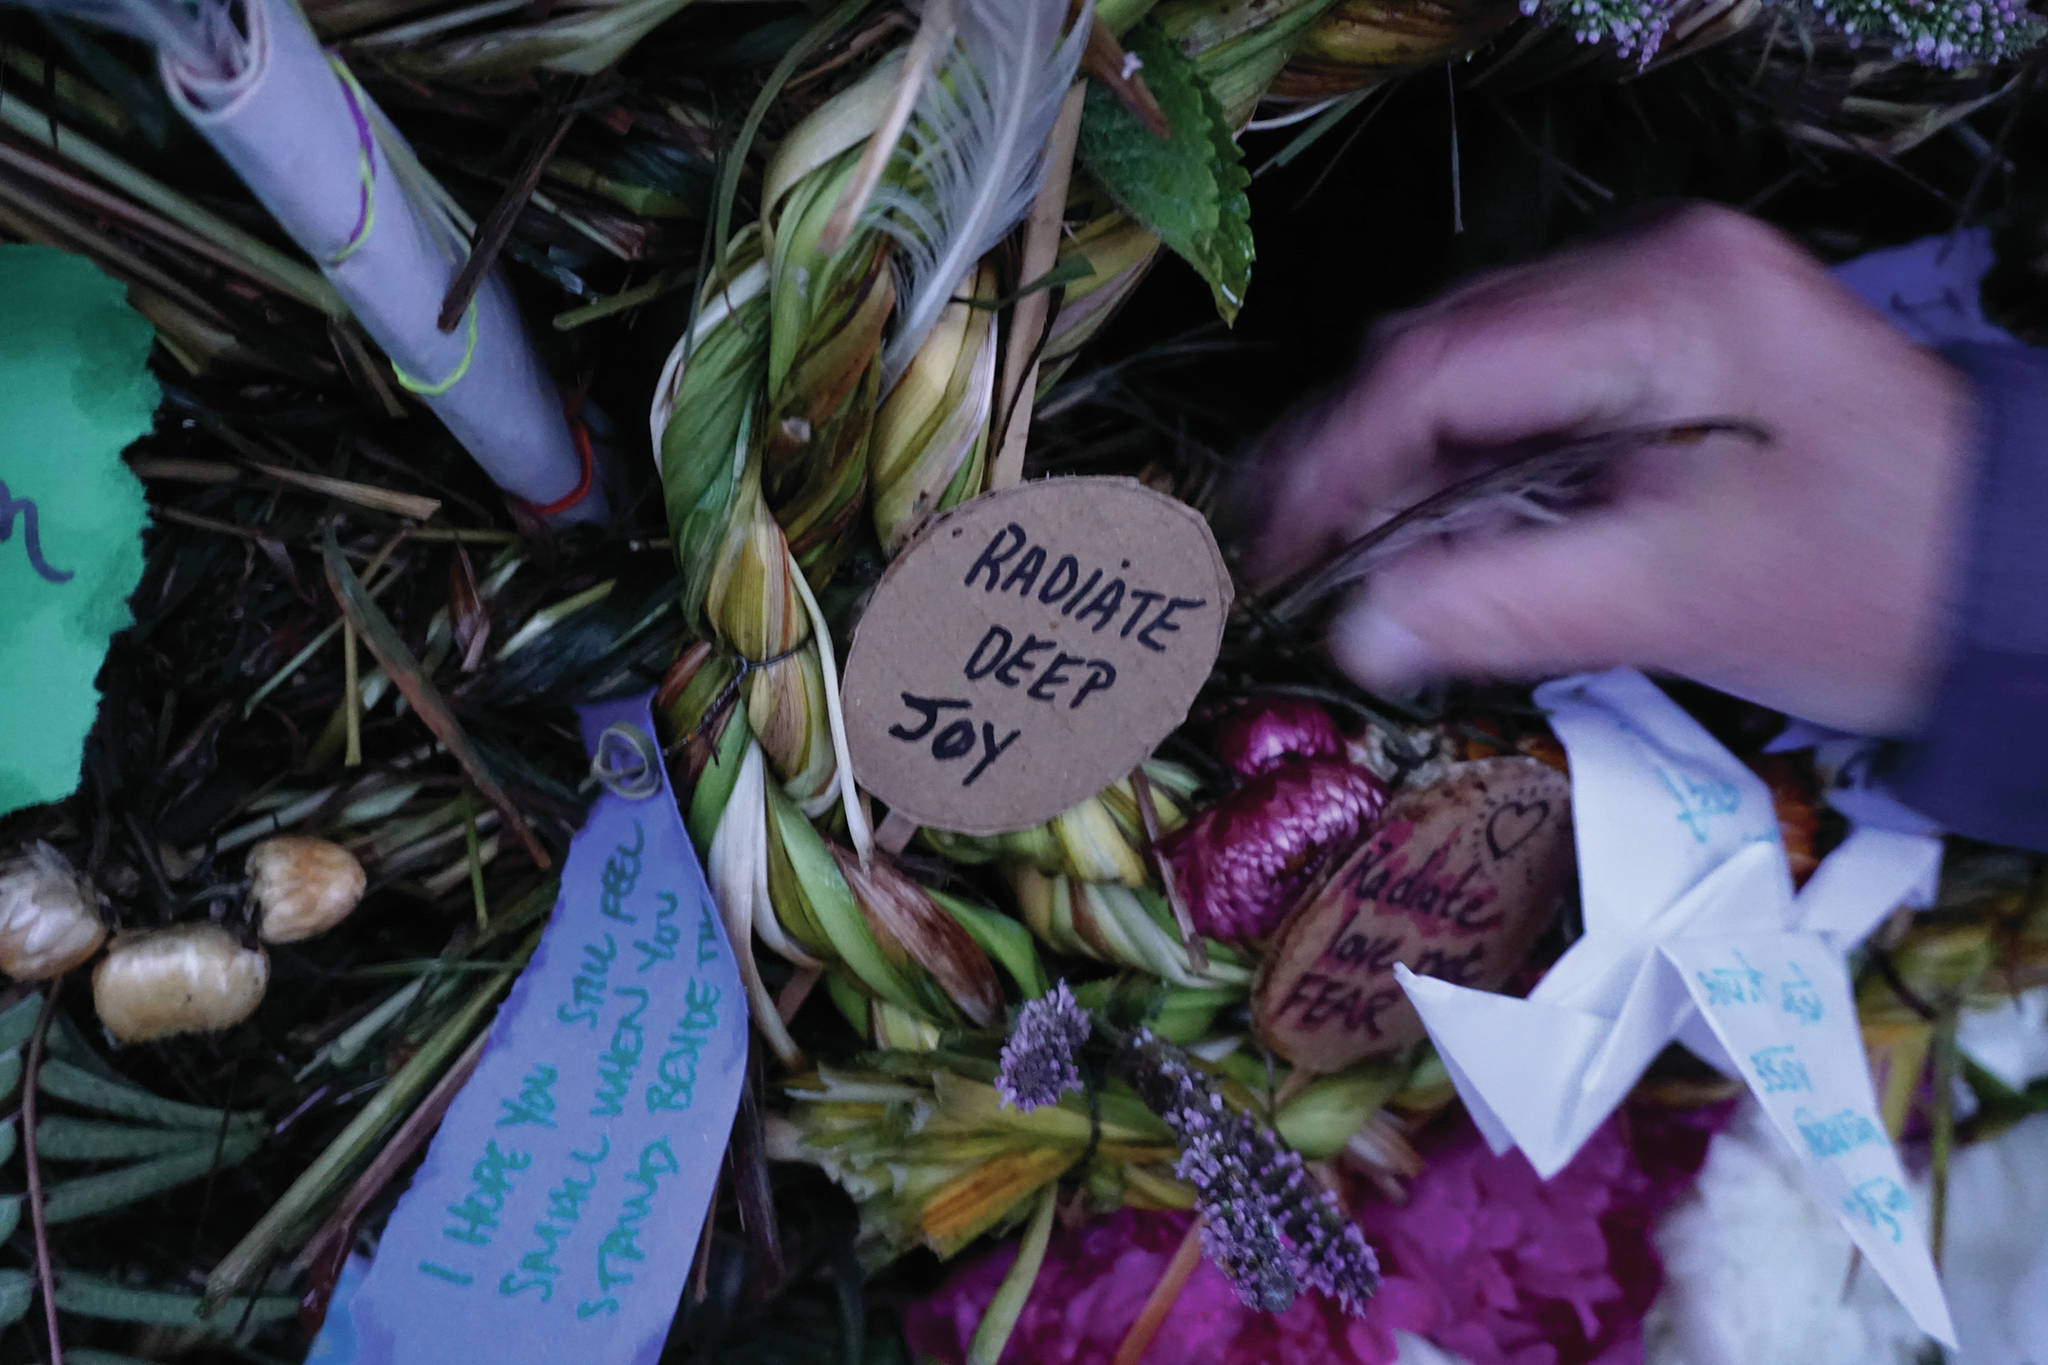 One of the signs on “Radiate,” the 16th annual Burning Basket. The basket was burned on Sunday night, Sept. 15, 2019, at Mariner Park on the Homer Spit in Homer, Alaska. (Photo by Michael Armstrong/Homer News)